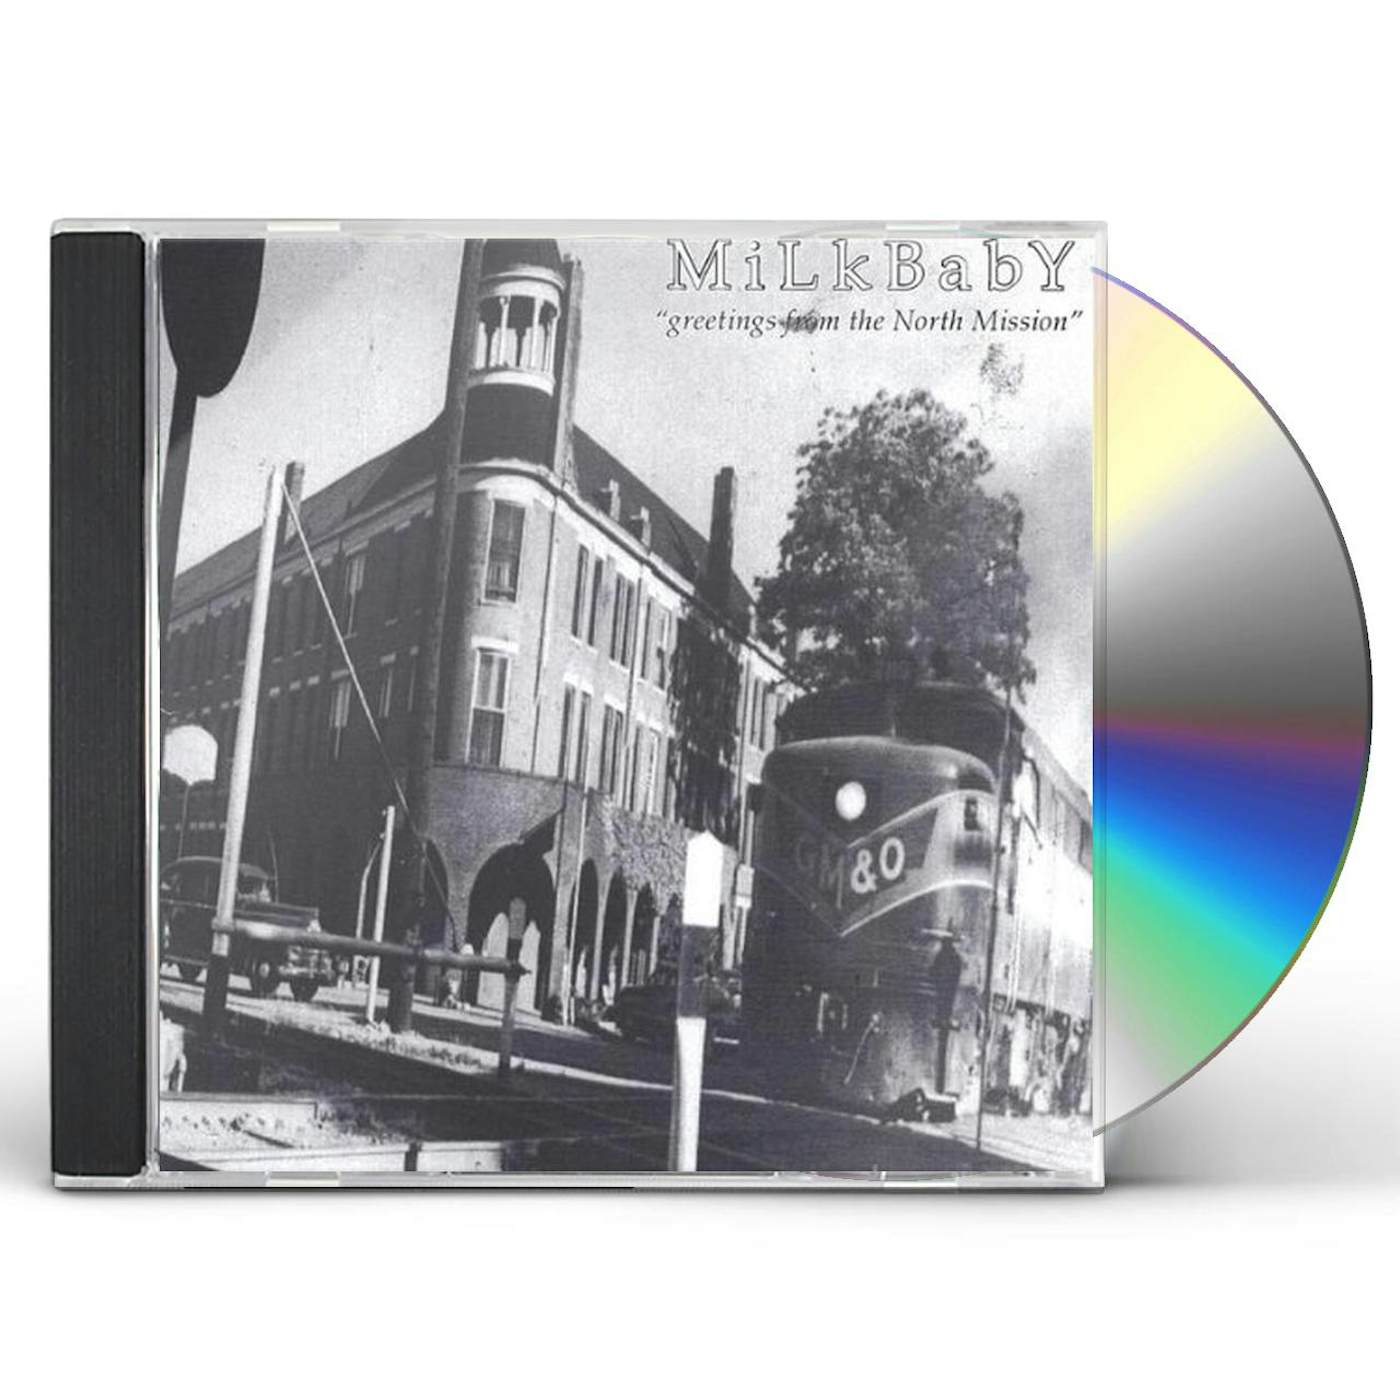 Milkbaby GREETINGS FROM THE NORTH MISSION CD